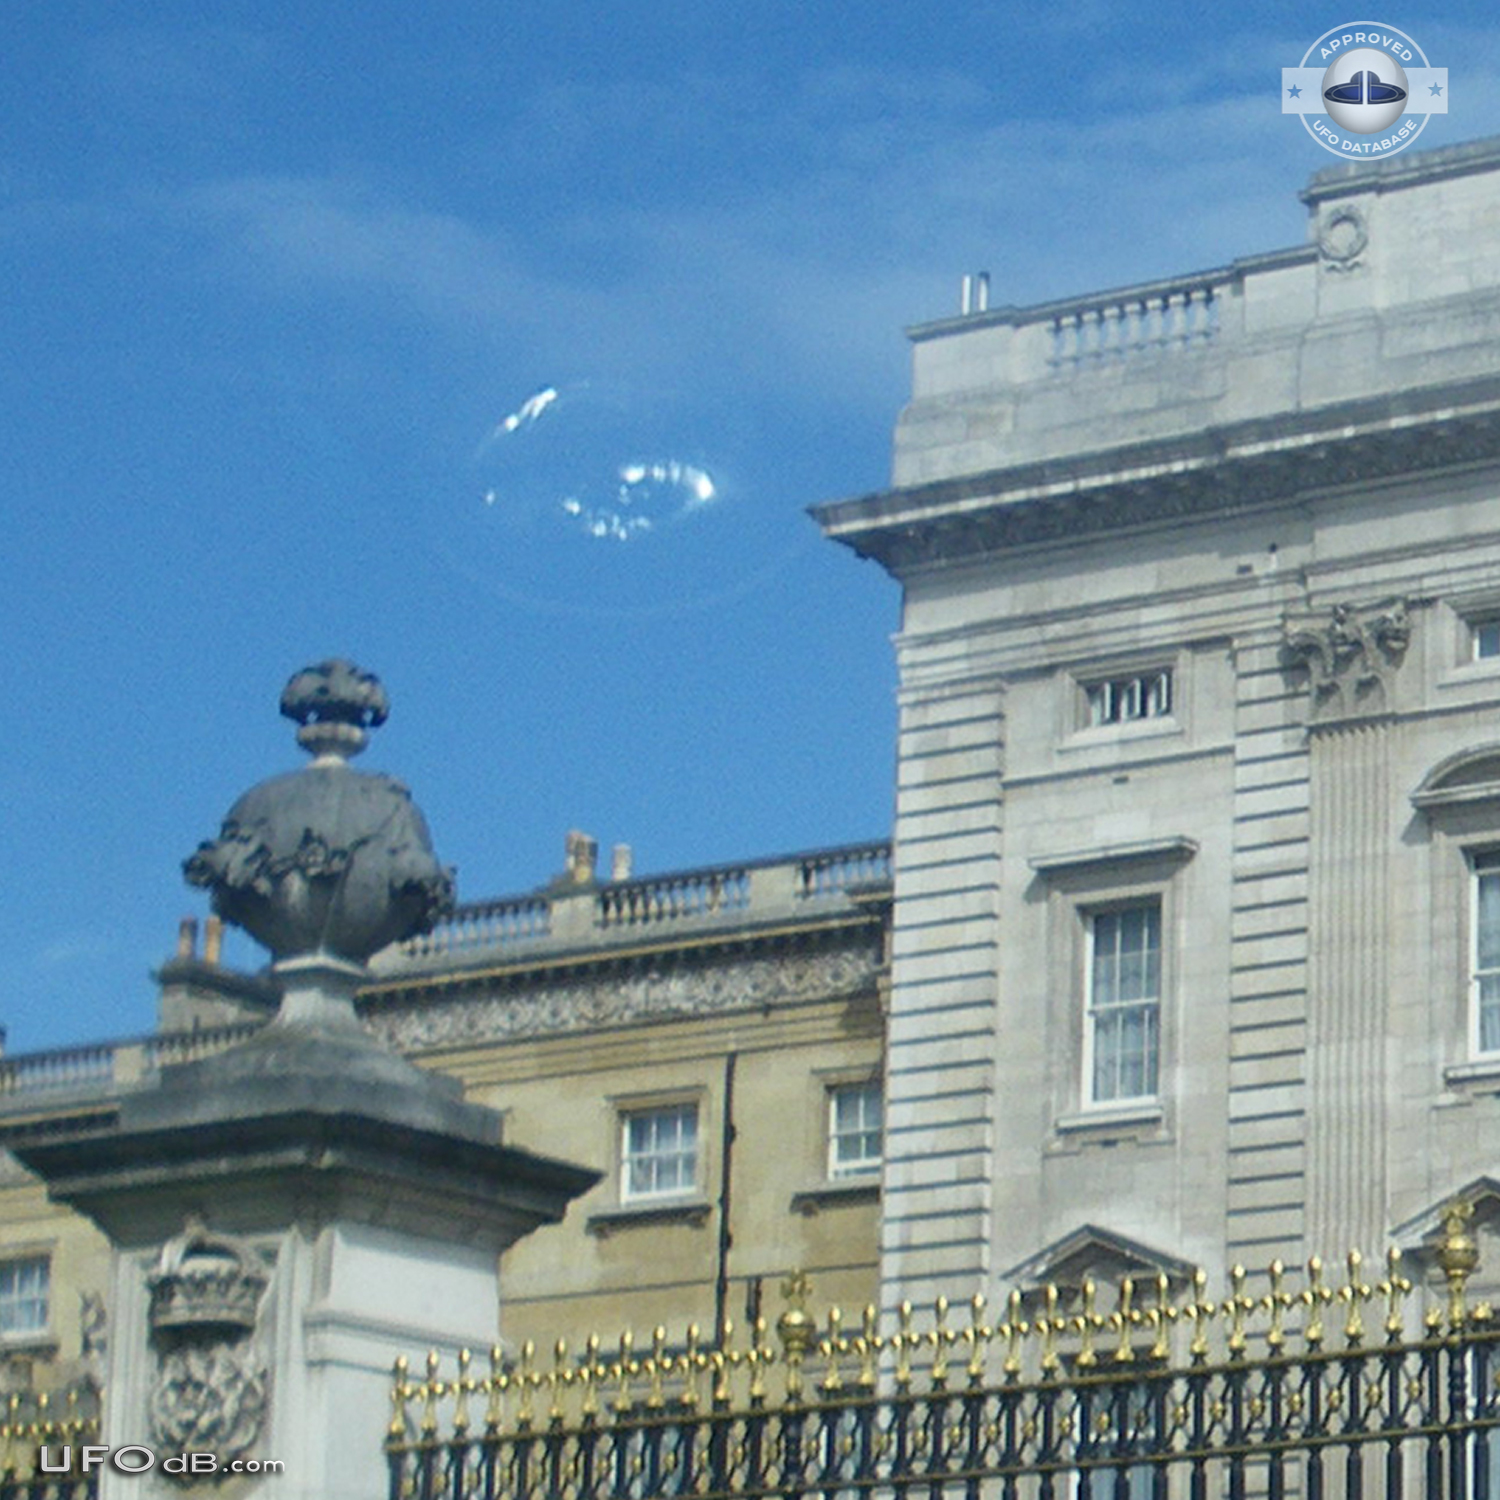 Strange ring UFO with clouds over Buckingham palace London UK 2012 UFO Picture #525-2